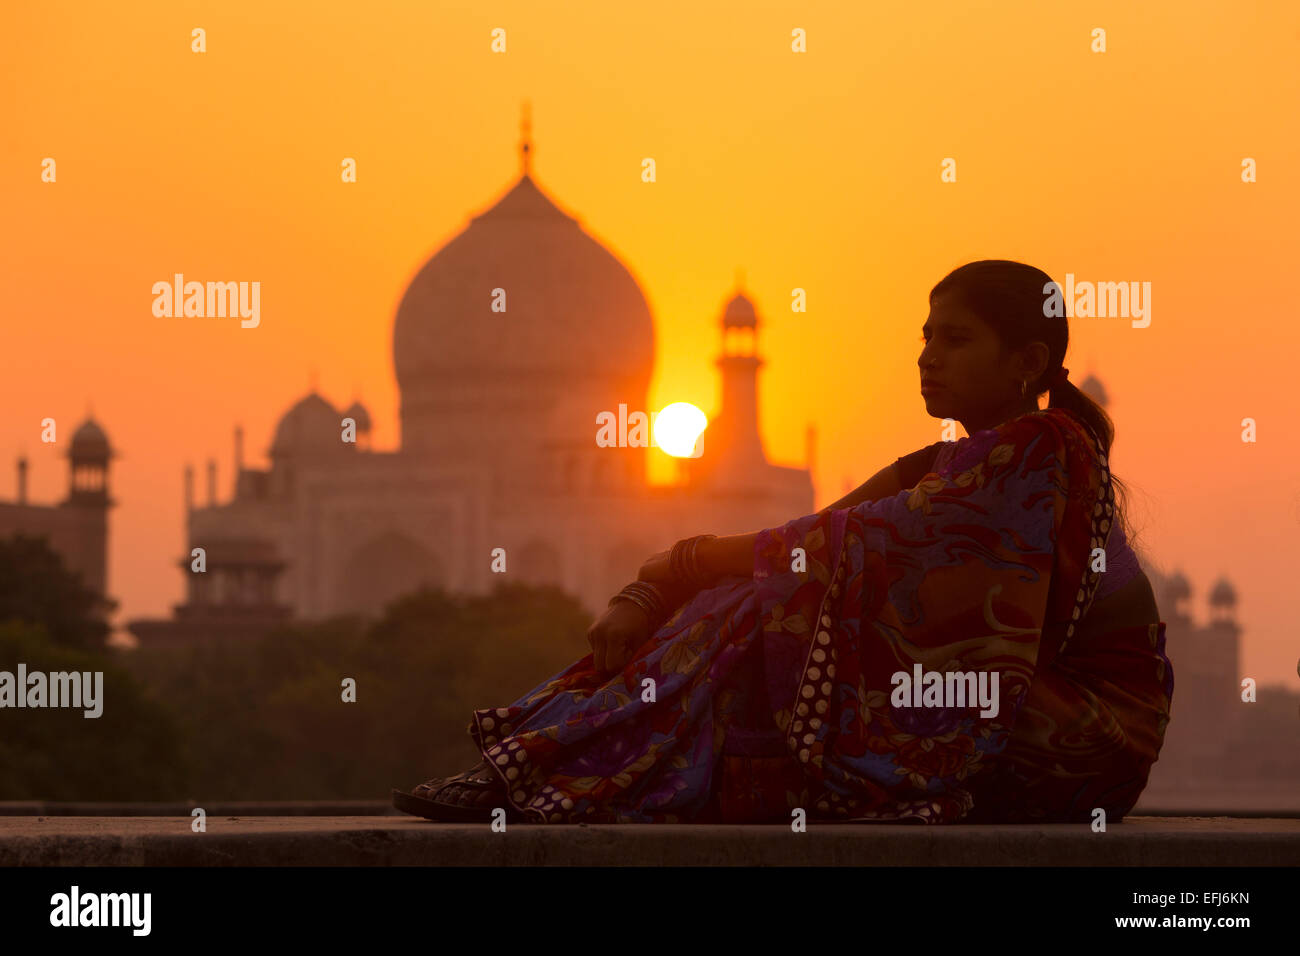 India, Uttar Pradesh, Agra, young Indian woman in contemplative mood at sunset with Taj Mahal in distance Stock Photo